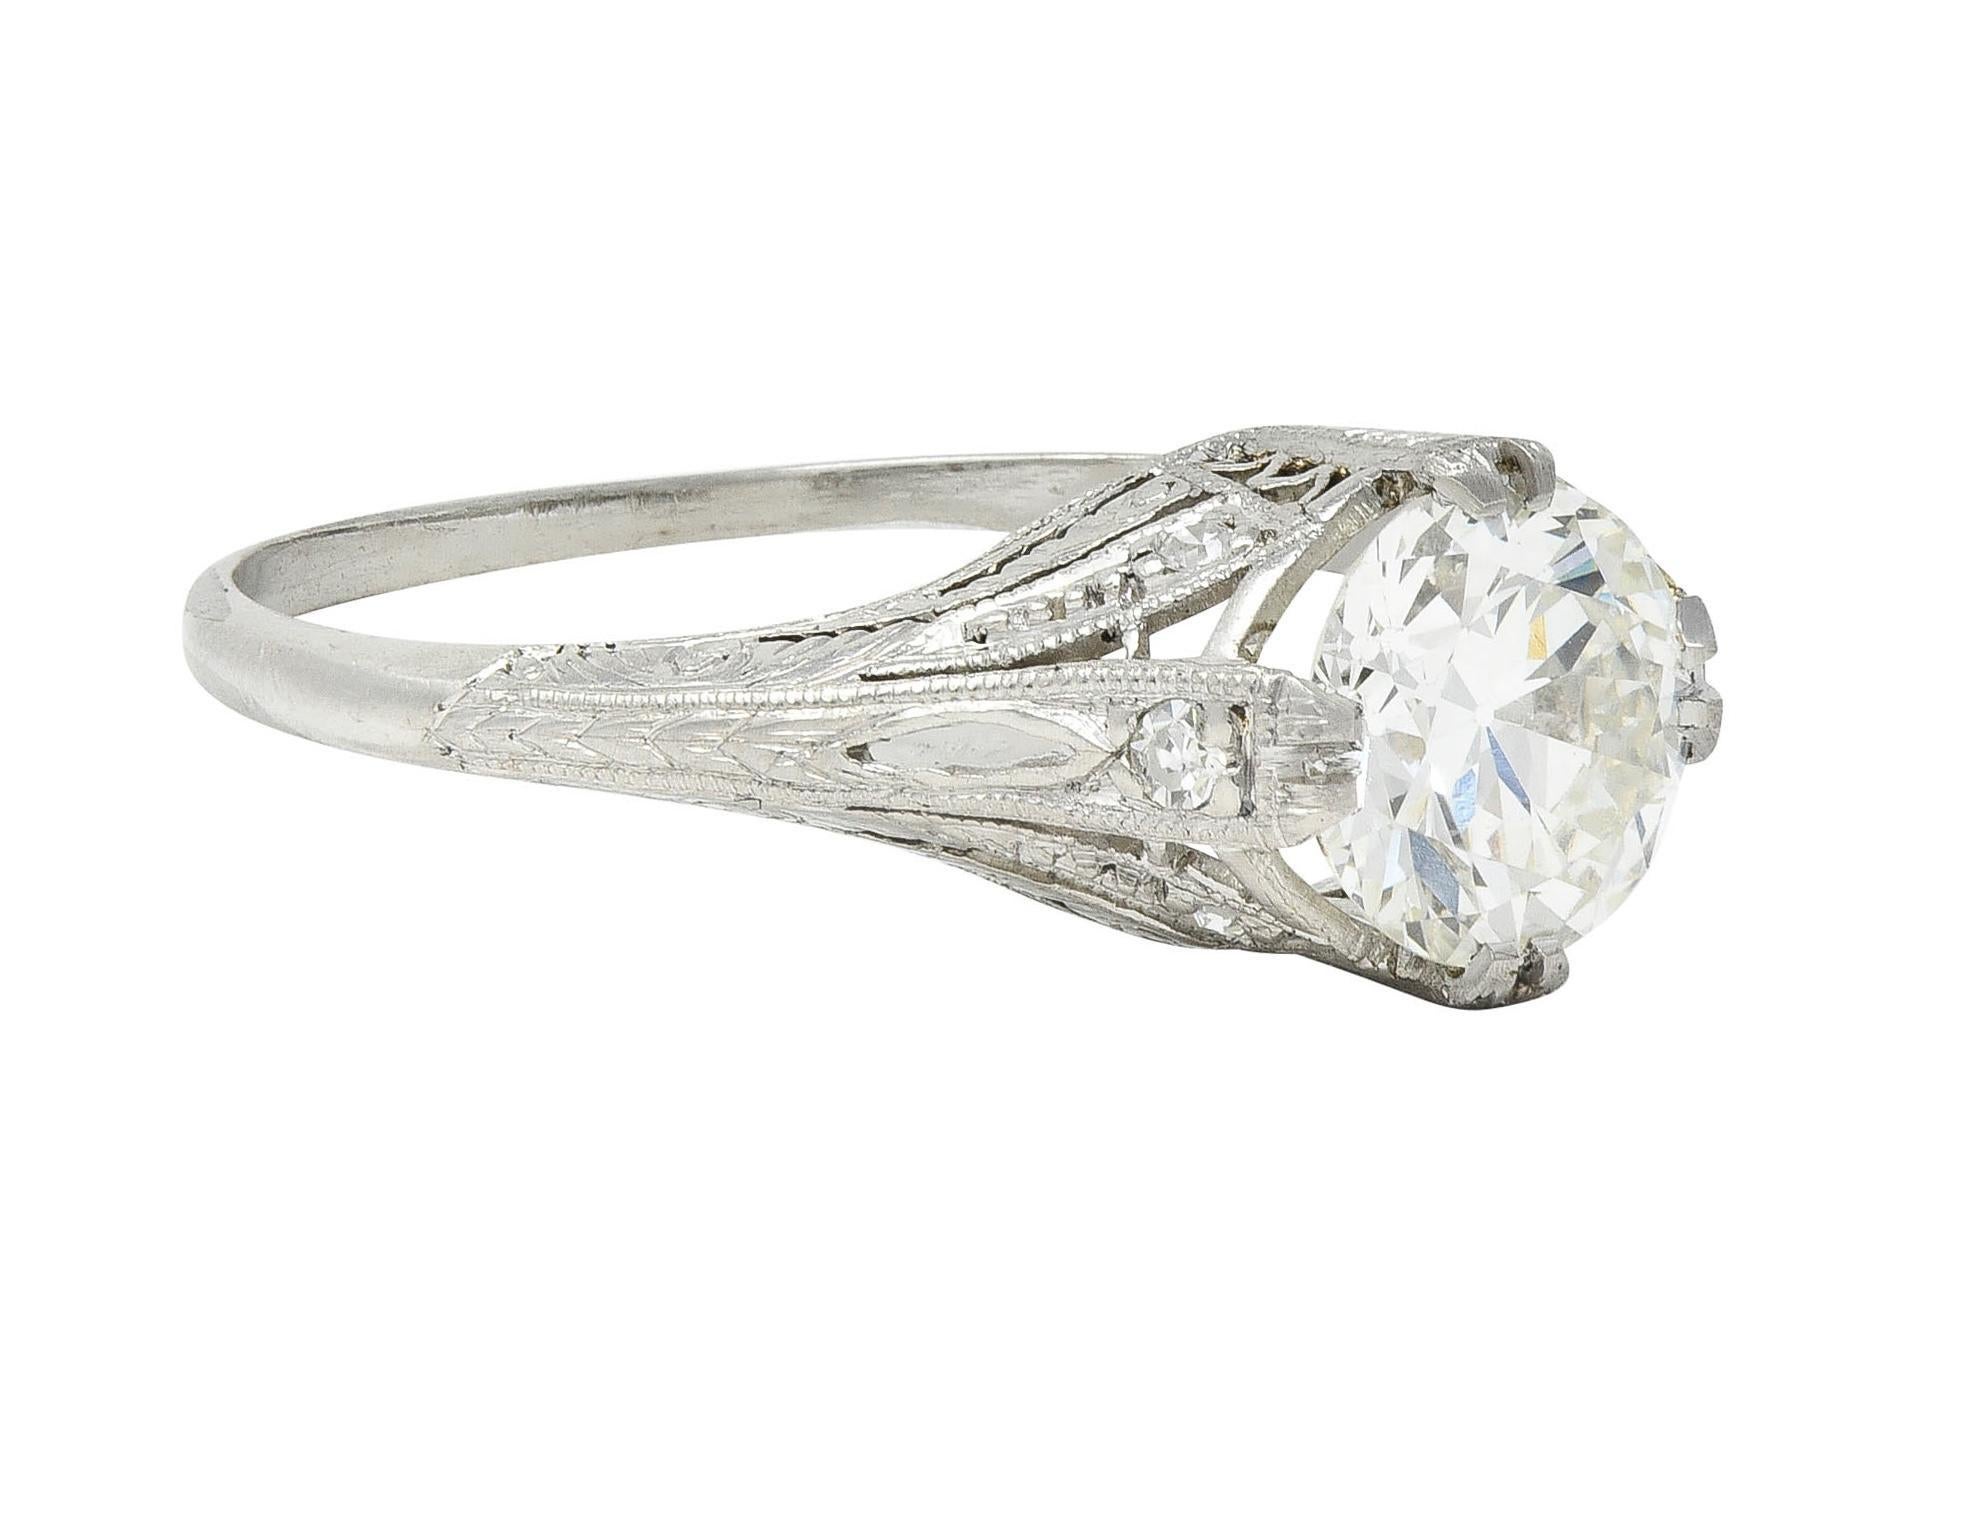 Centering an old European cut diamond weighing approximately 1.18 carats - J color with VS2 clarity
Set by stylized split prongs engraved with a wheat motif
Accented by single cut diamonds weighing approximately 0.08 carat total - eye clean and